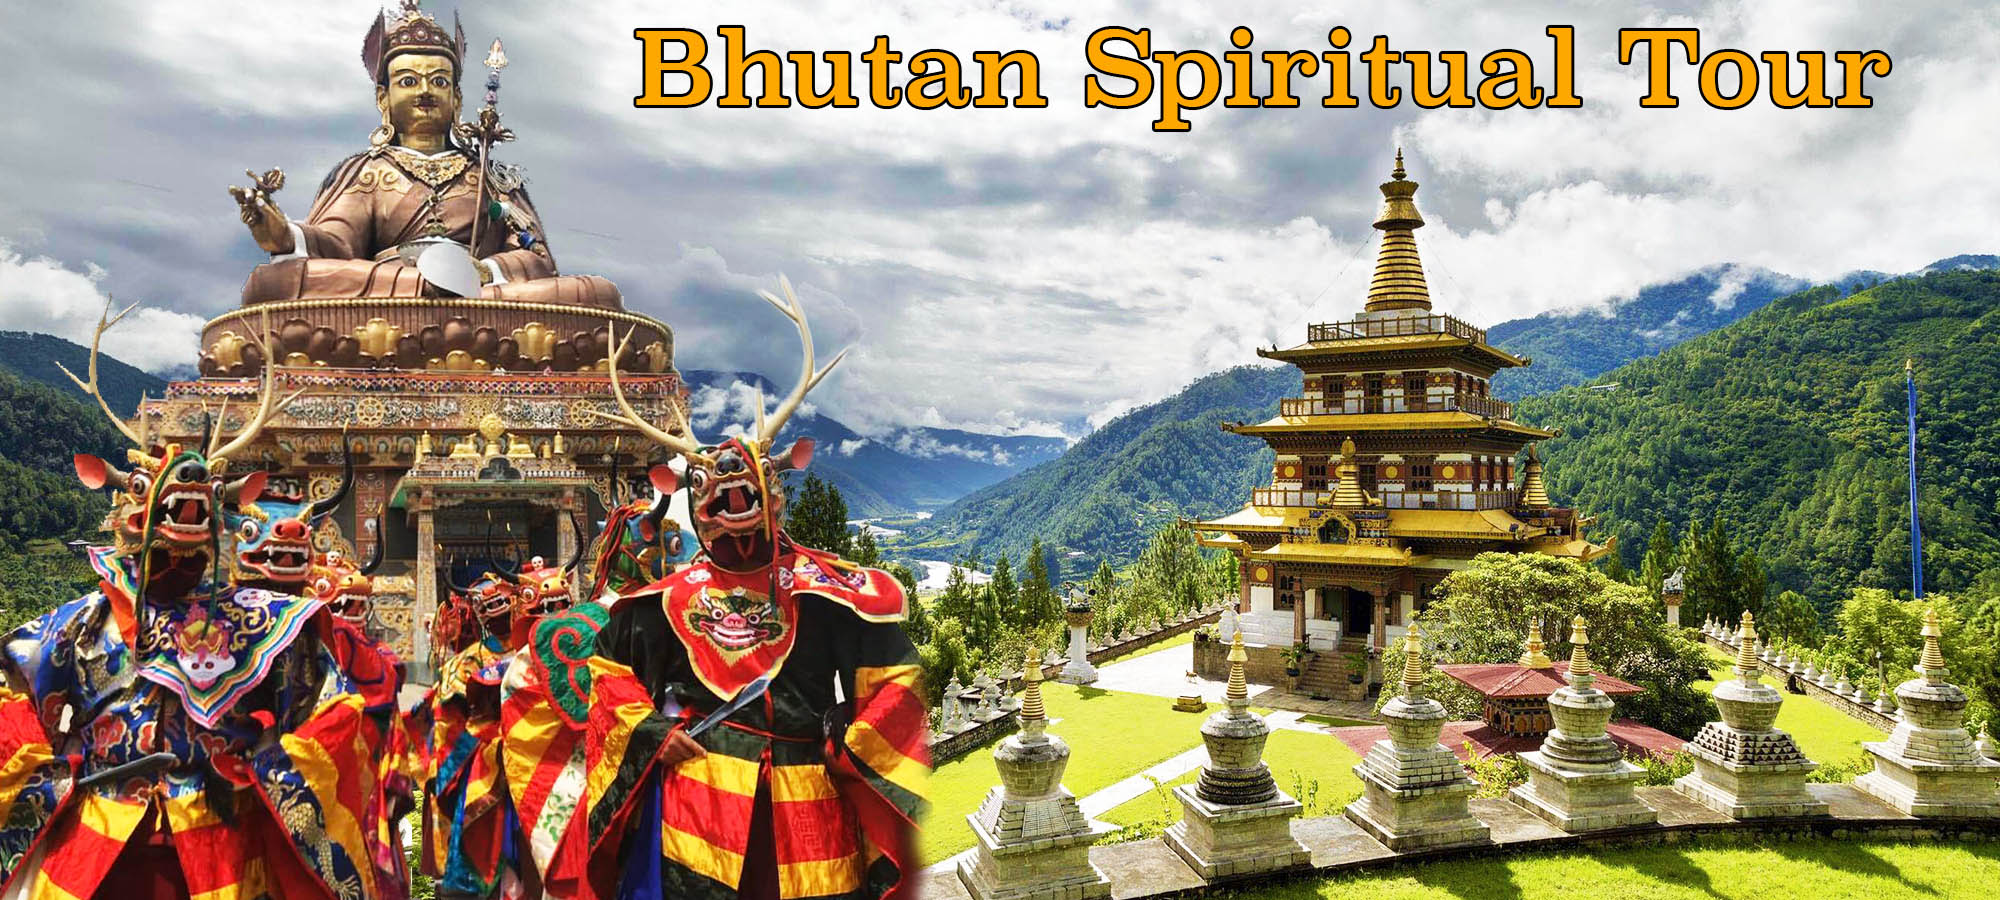 State religion of Bhutan is Buddhism